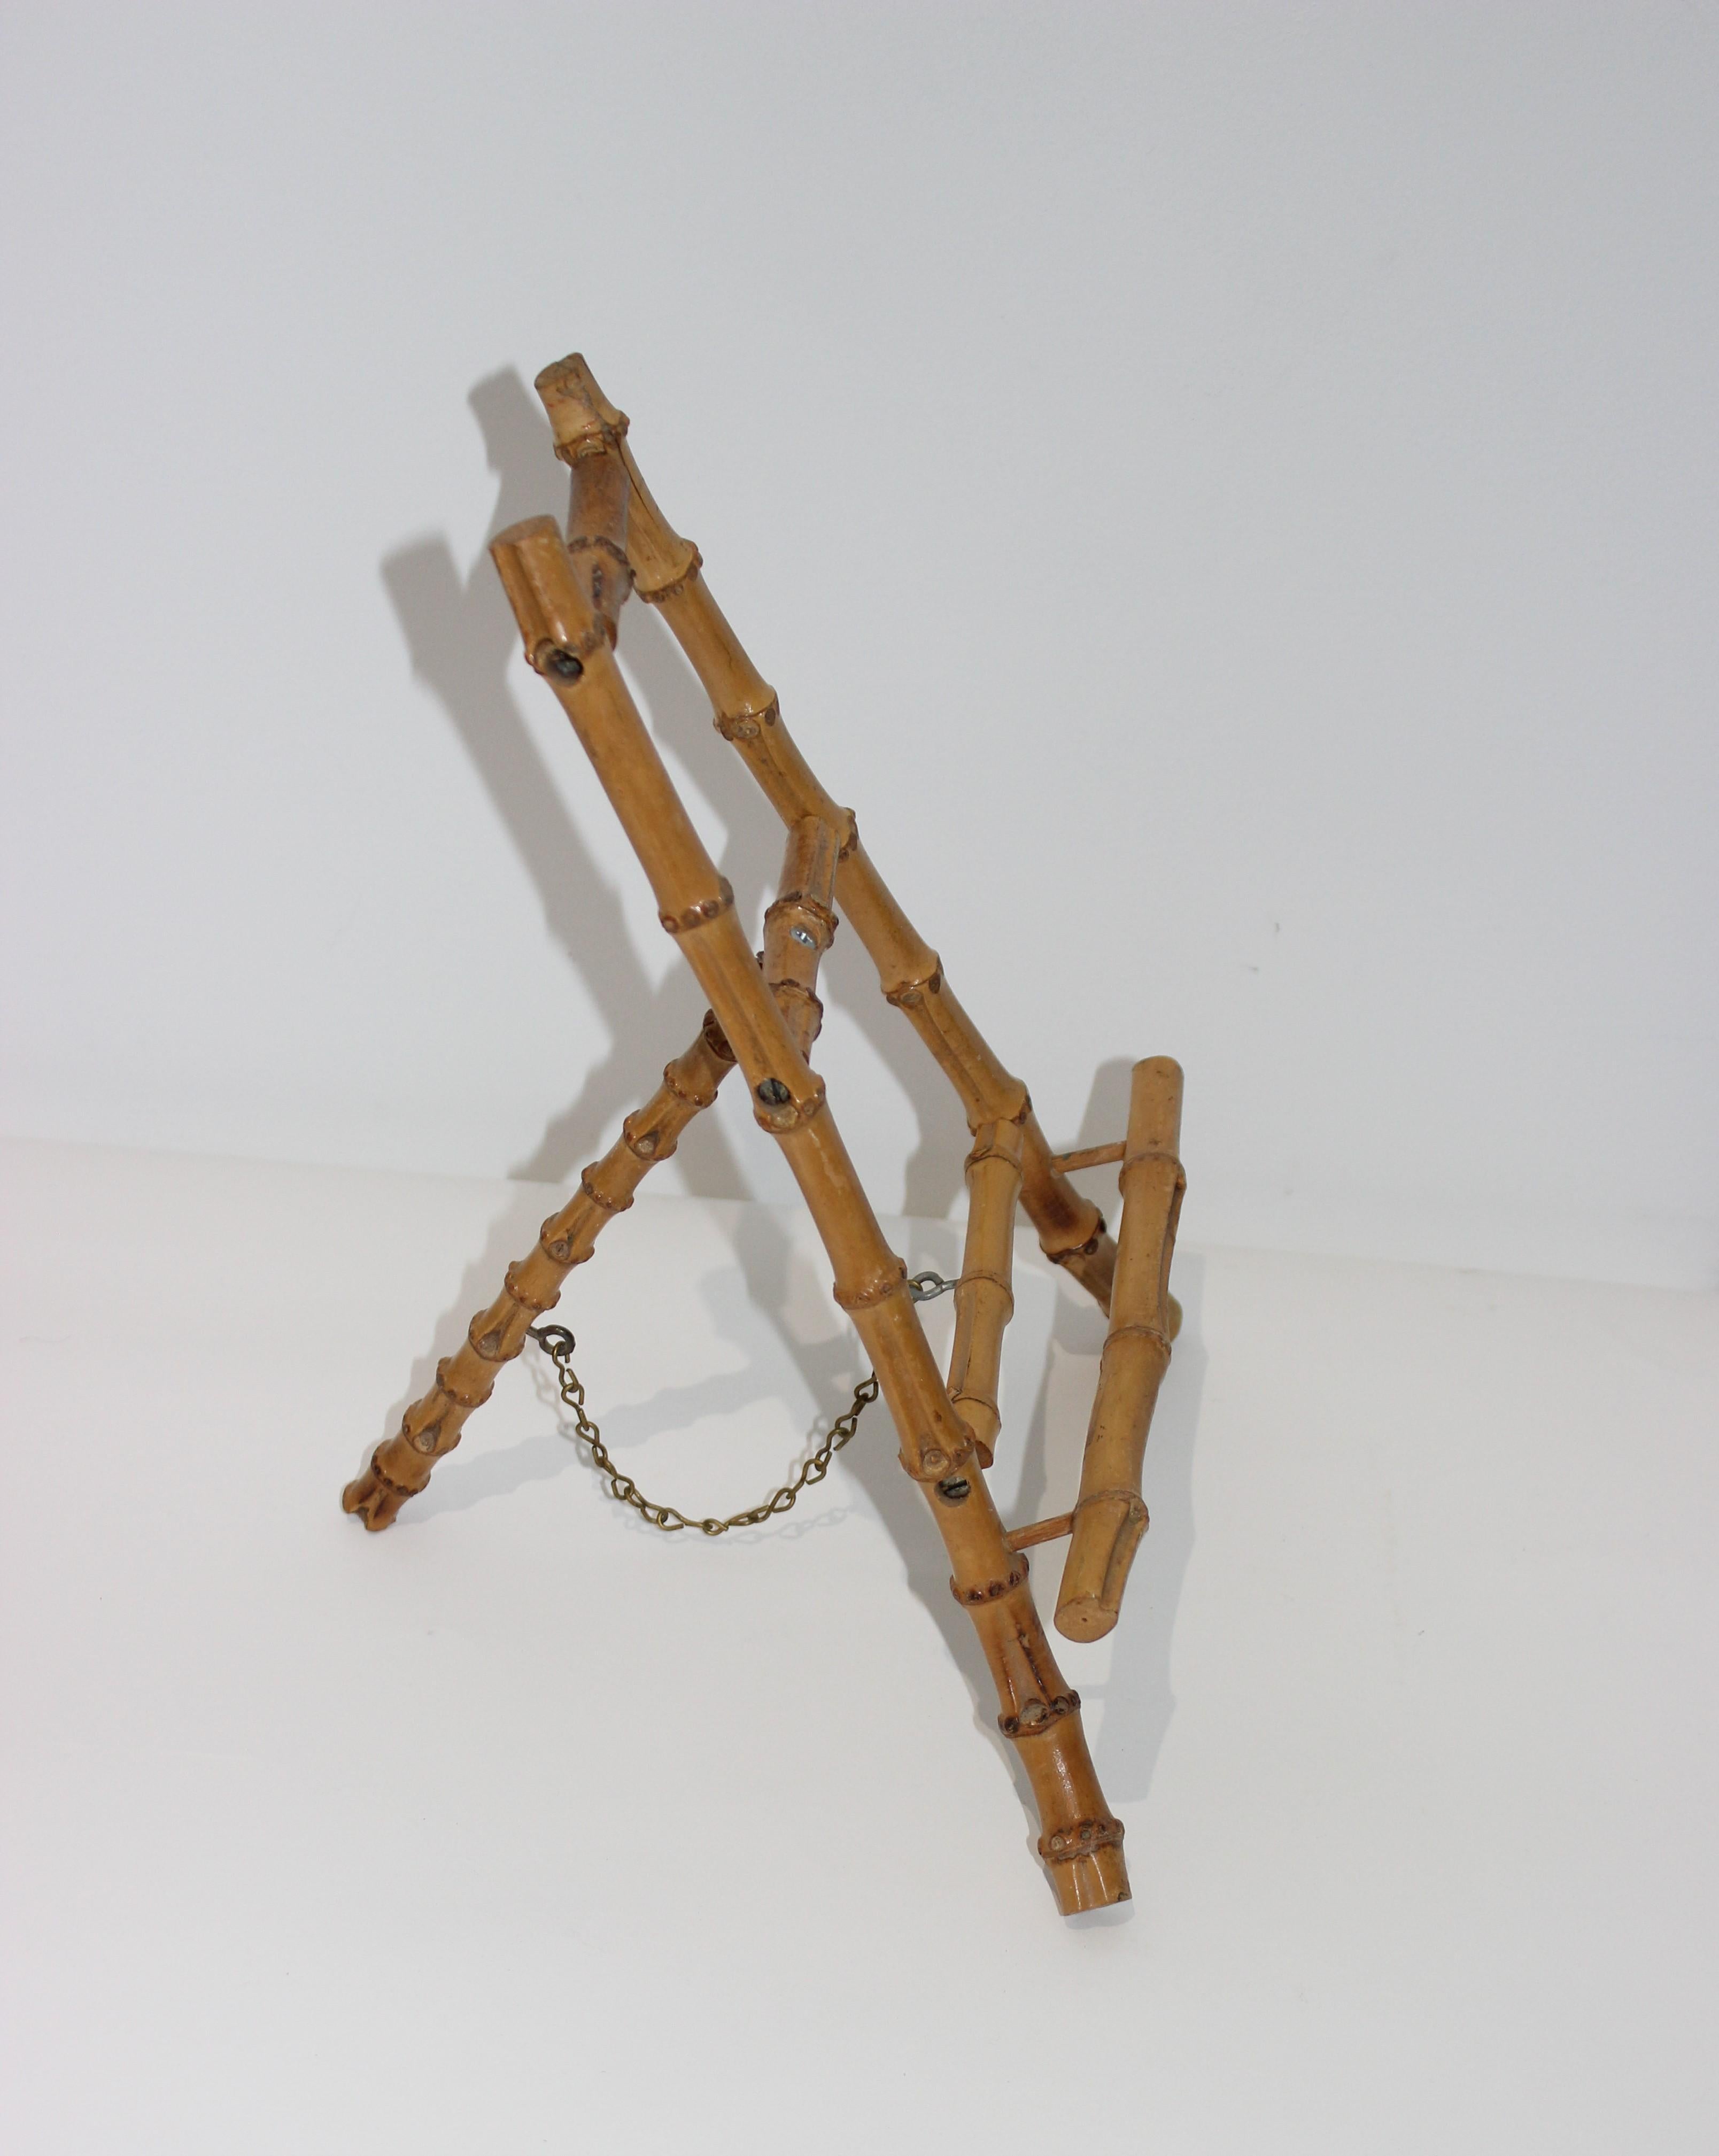 Bamboo desk accessory, work papers easel, from a Palm Beach estate, perfect for holding a reference work paper or calendar or to do typing or data entry.